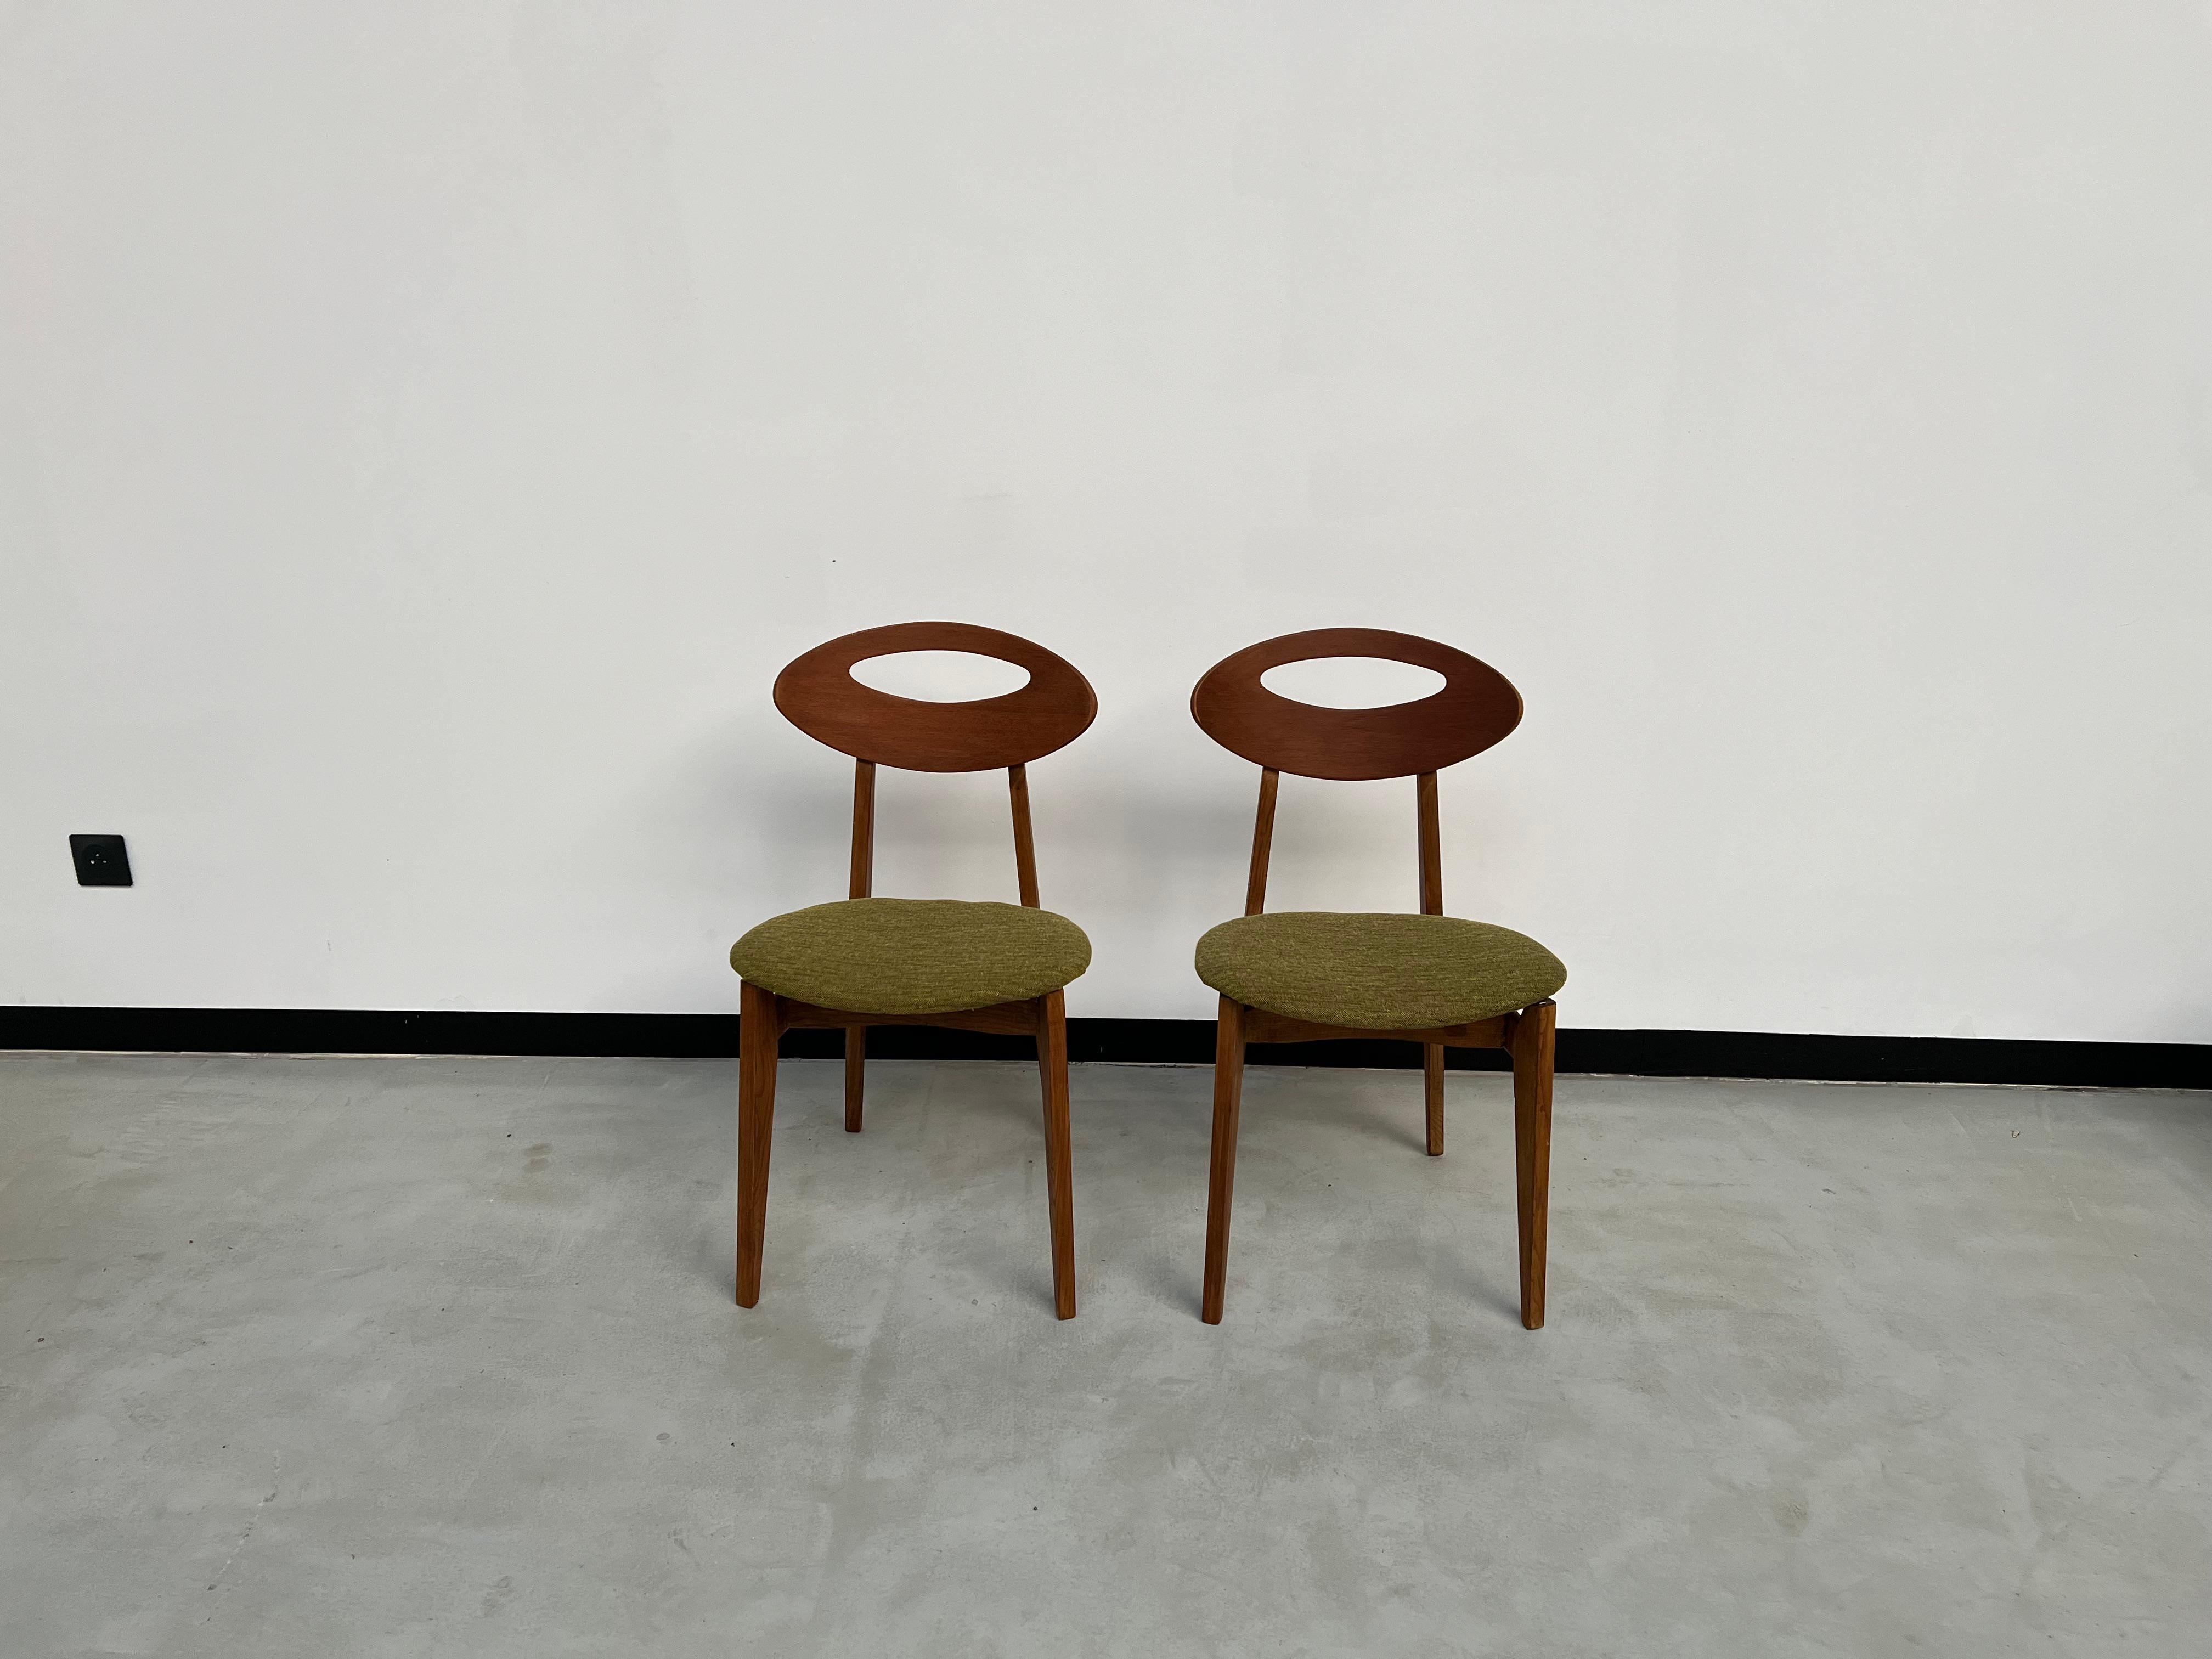  Duo of Roger Landault chairs for Sentou, France 50's 11